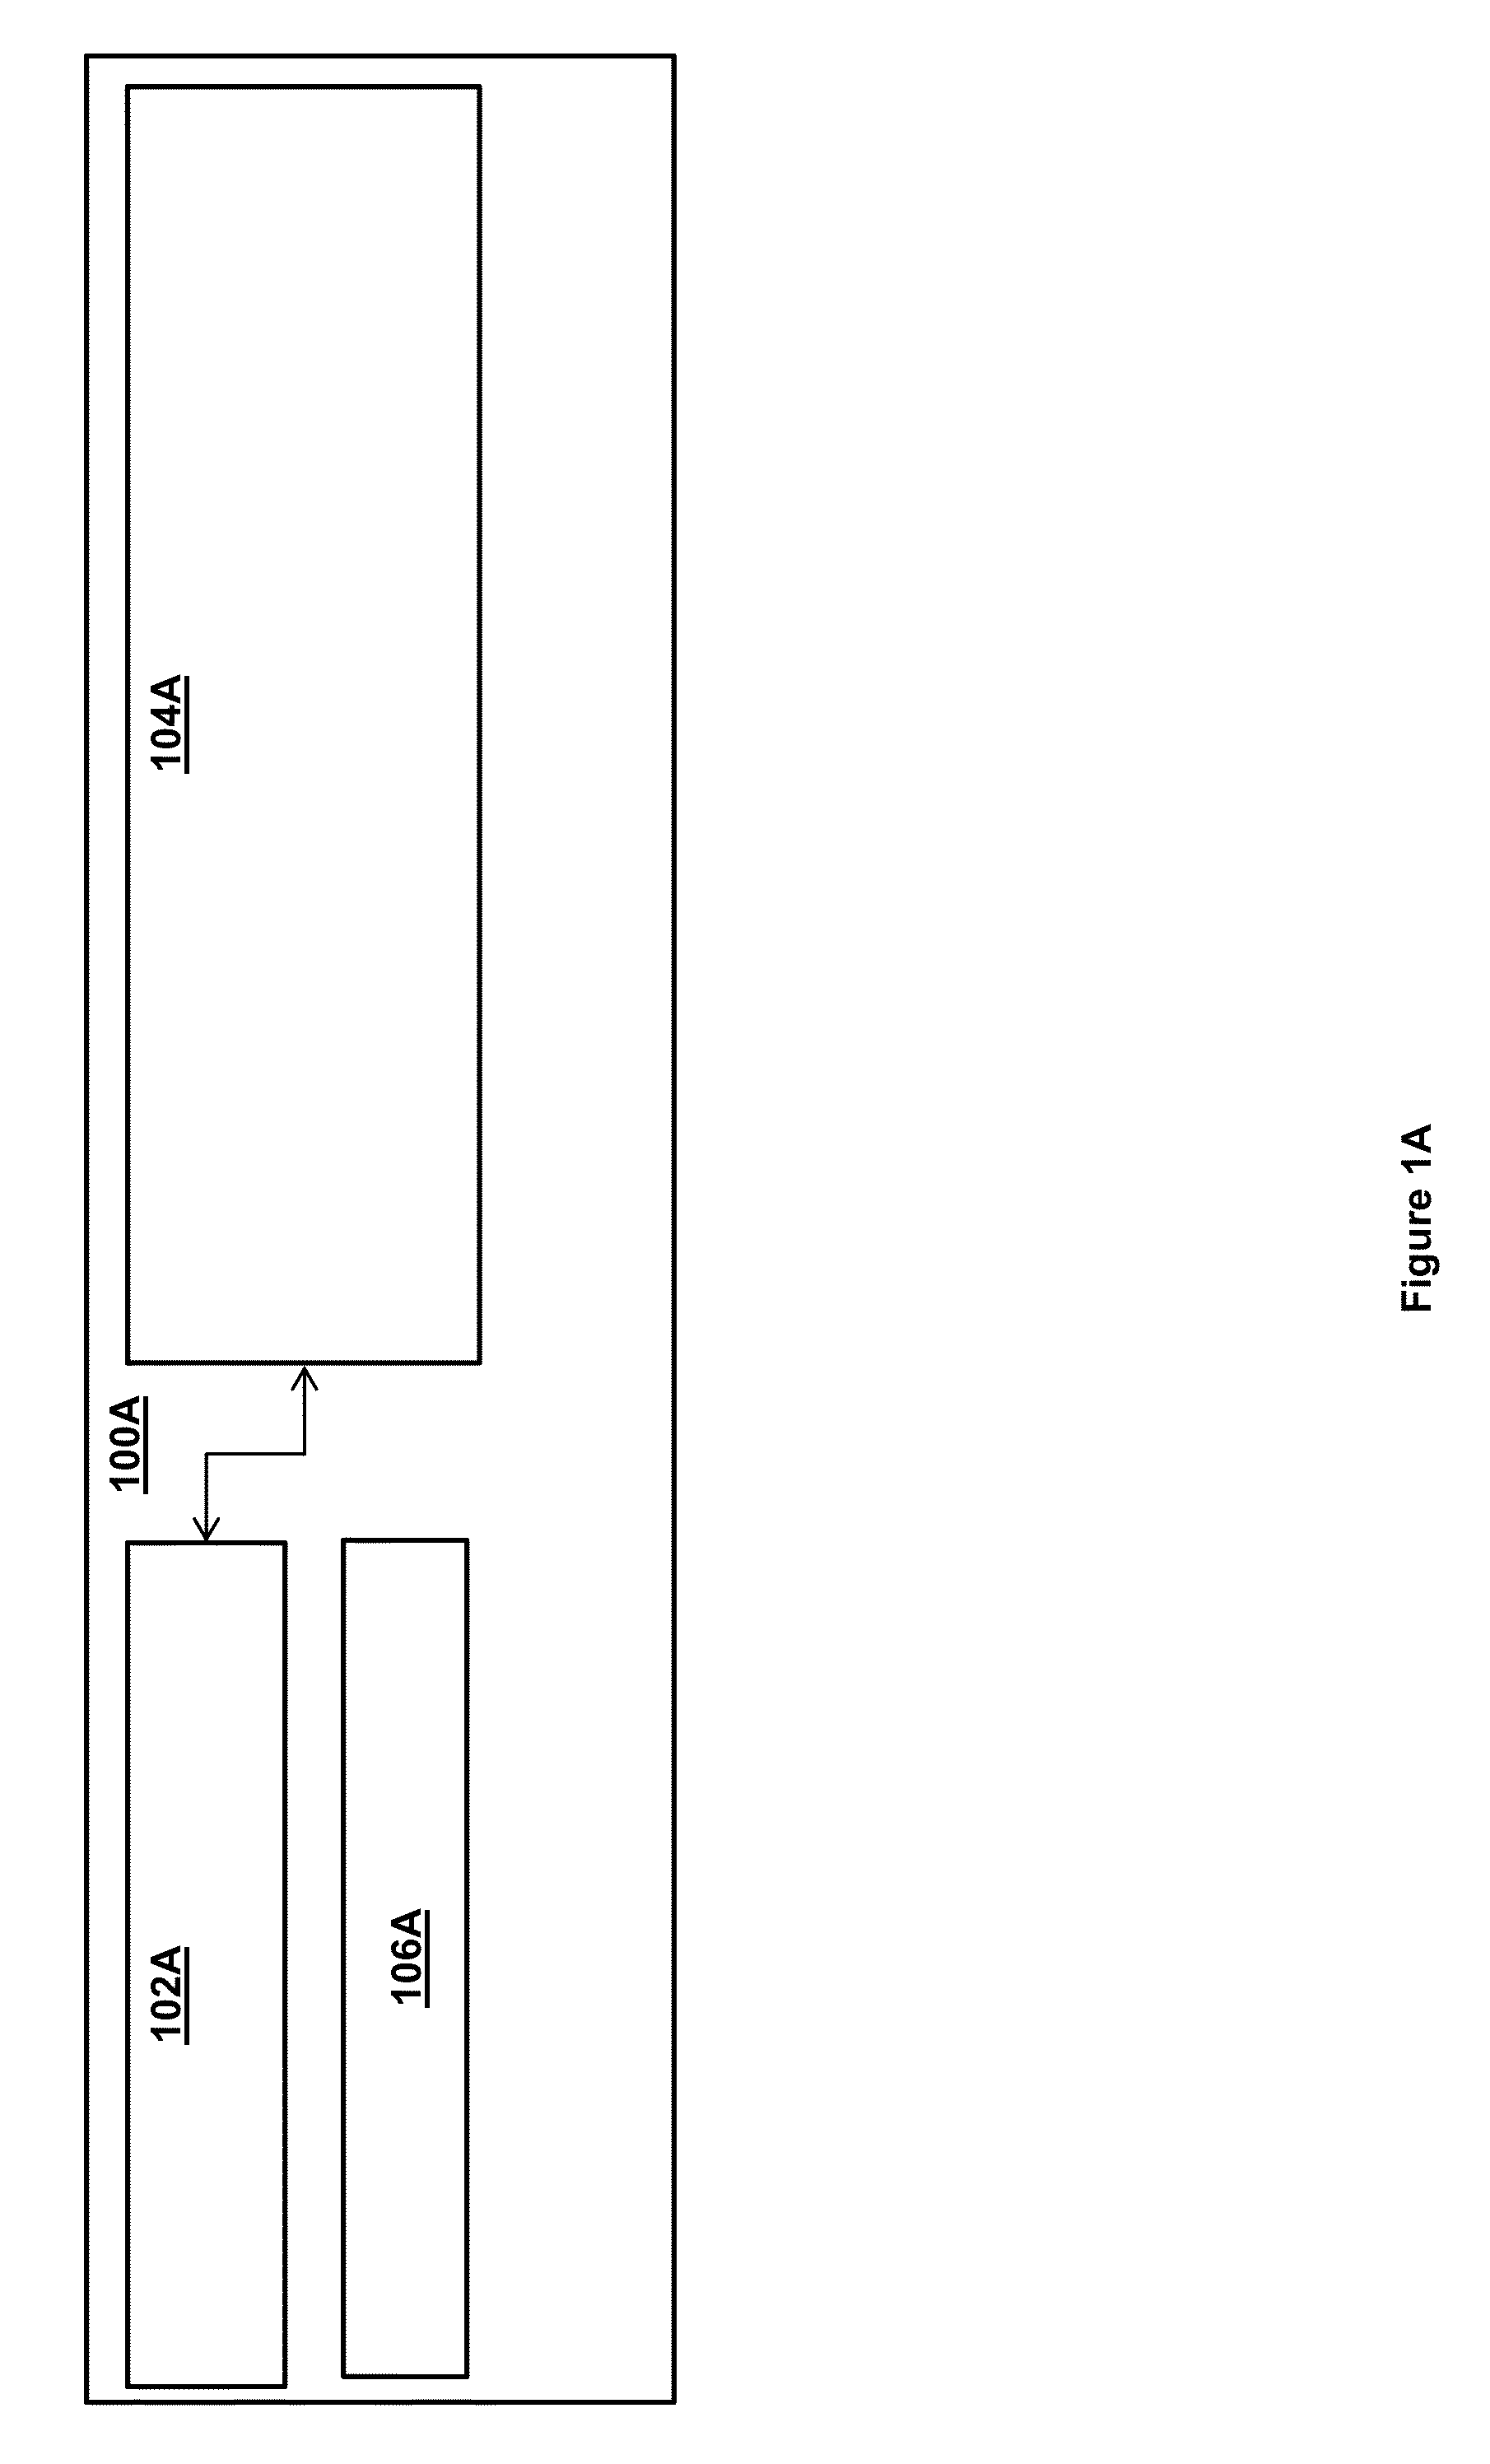 Method and system for managing and quantifying sun exposure